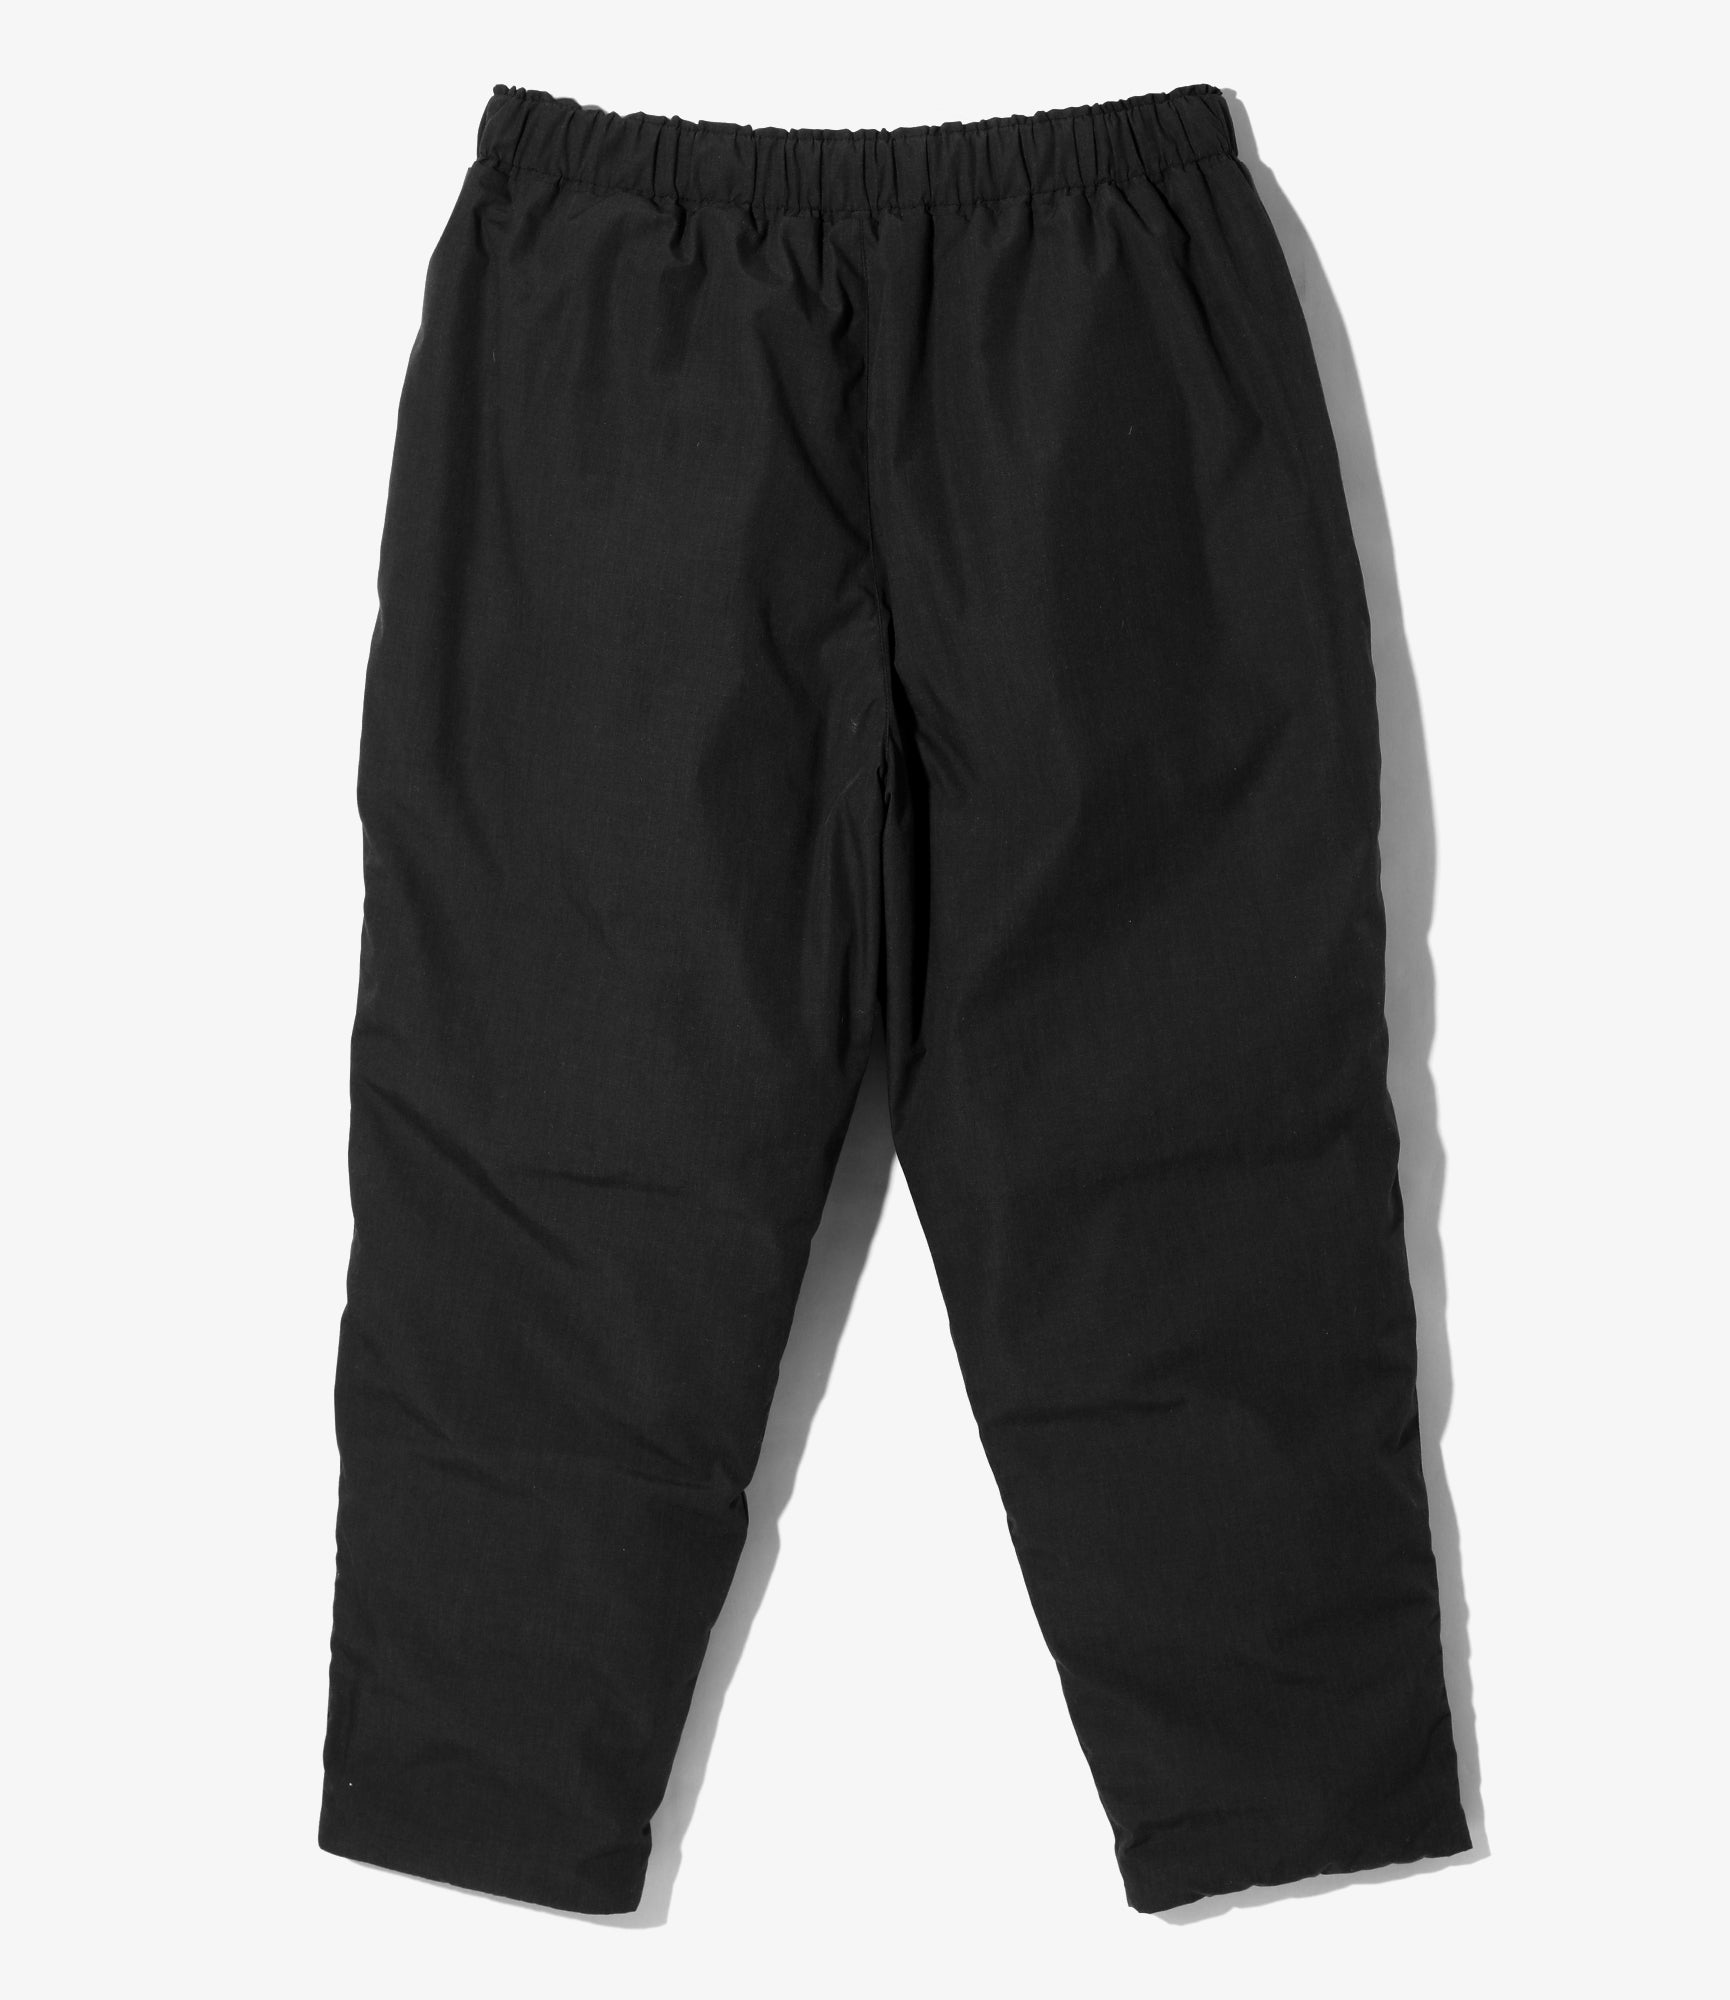 South2 West8 x Nanga - Belted C.S. Pant - Black - Flame Resistant